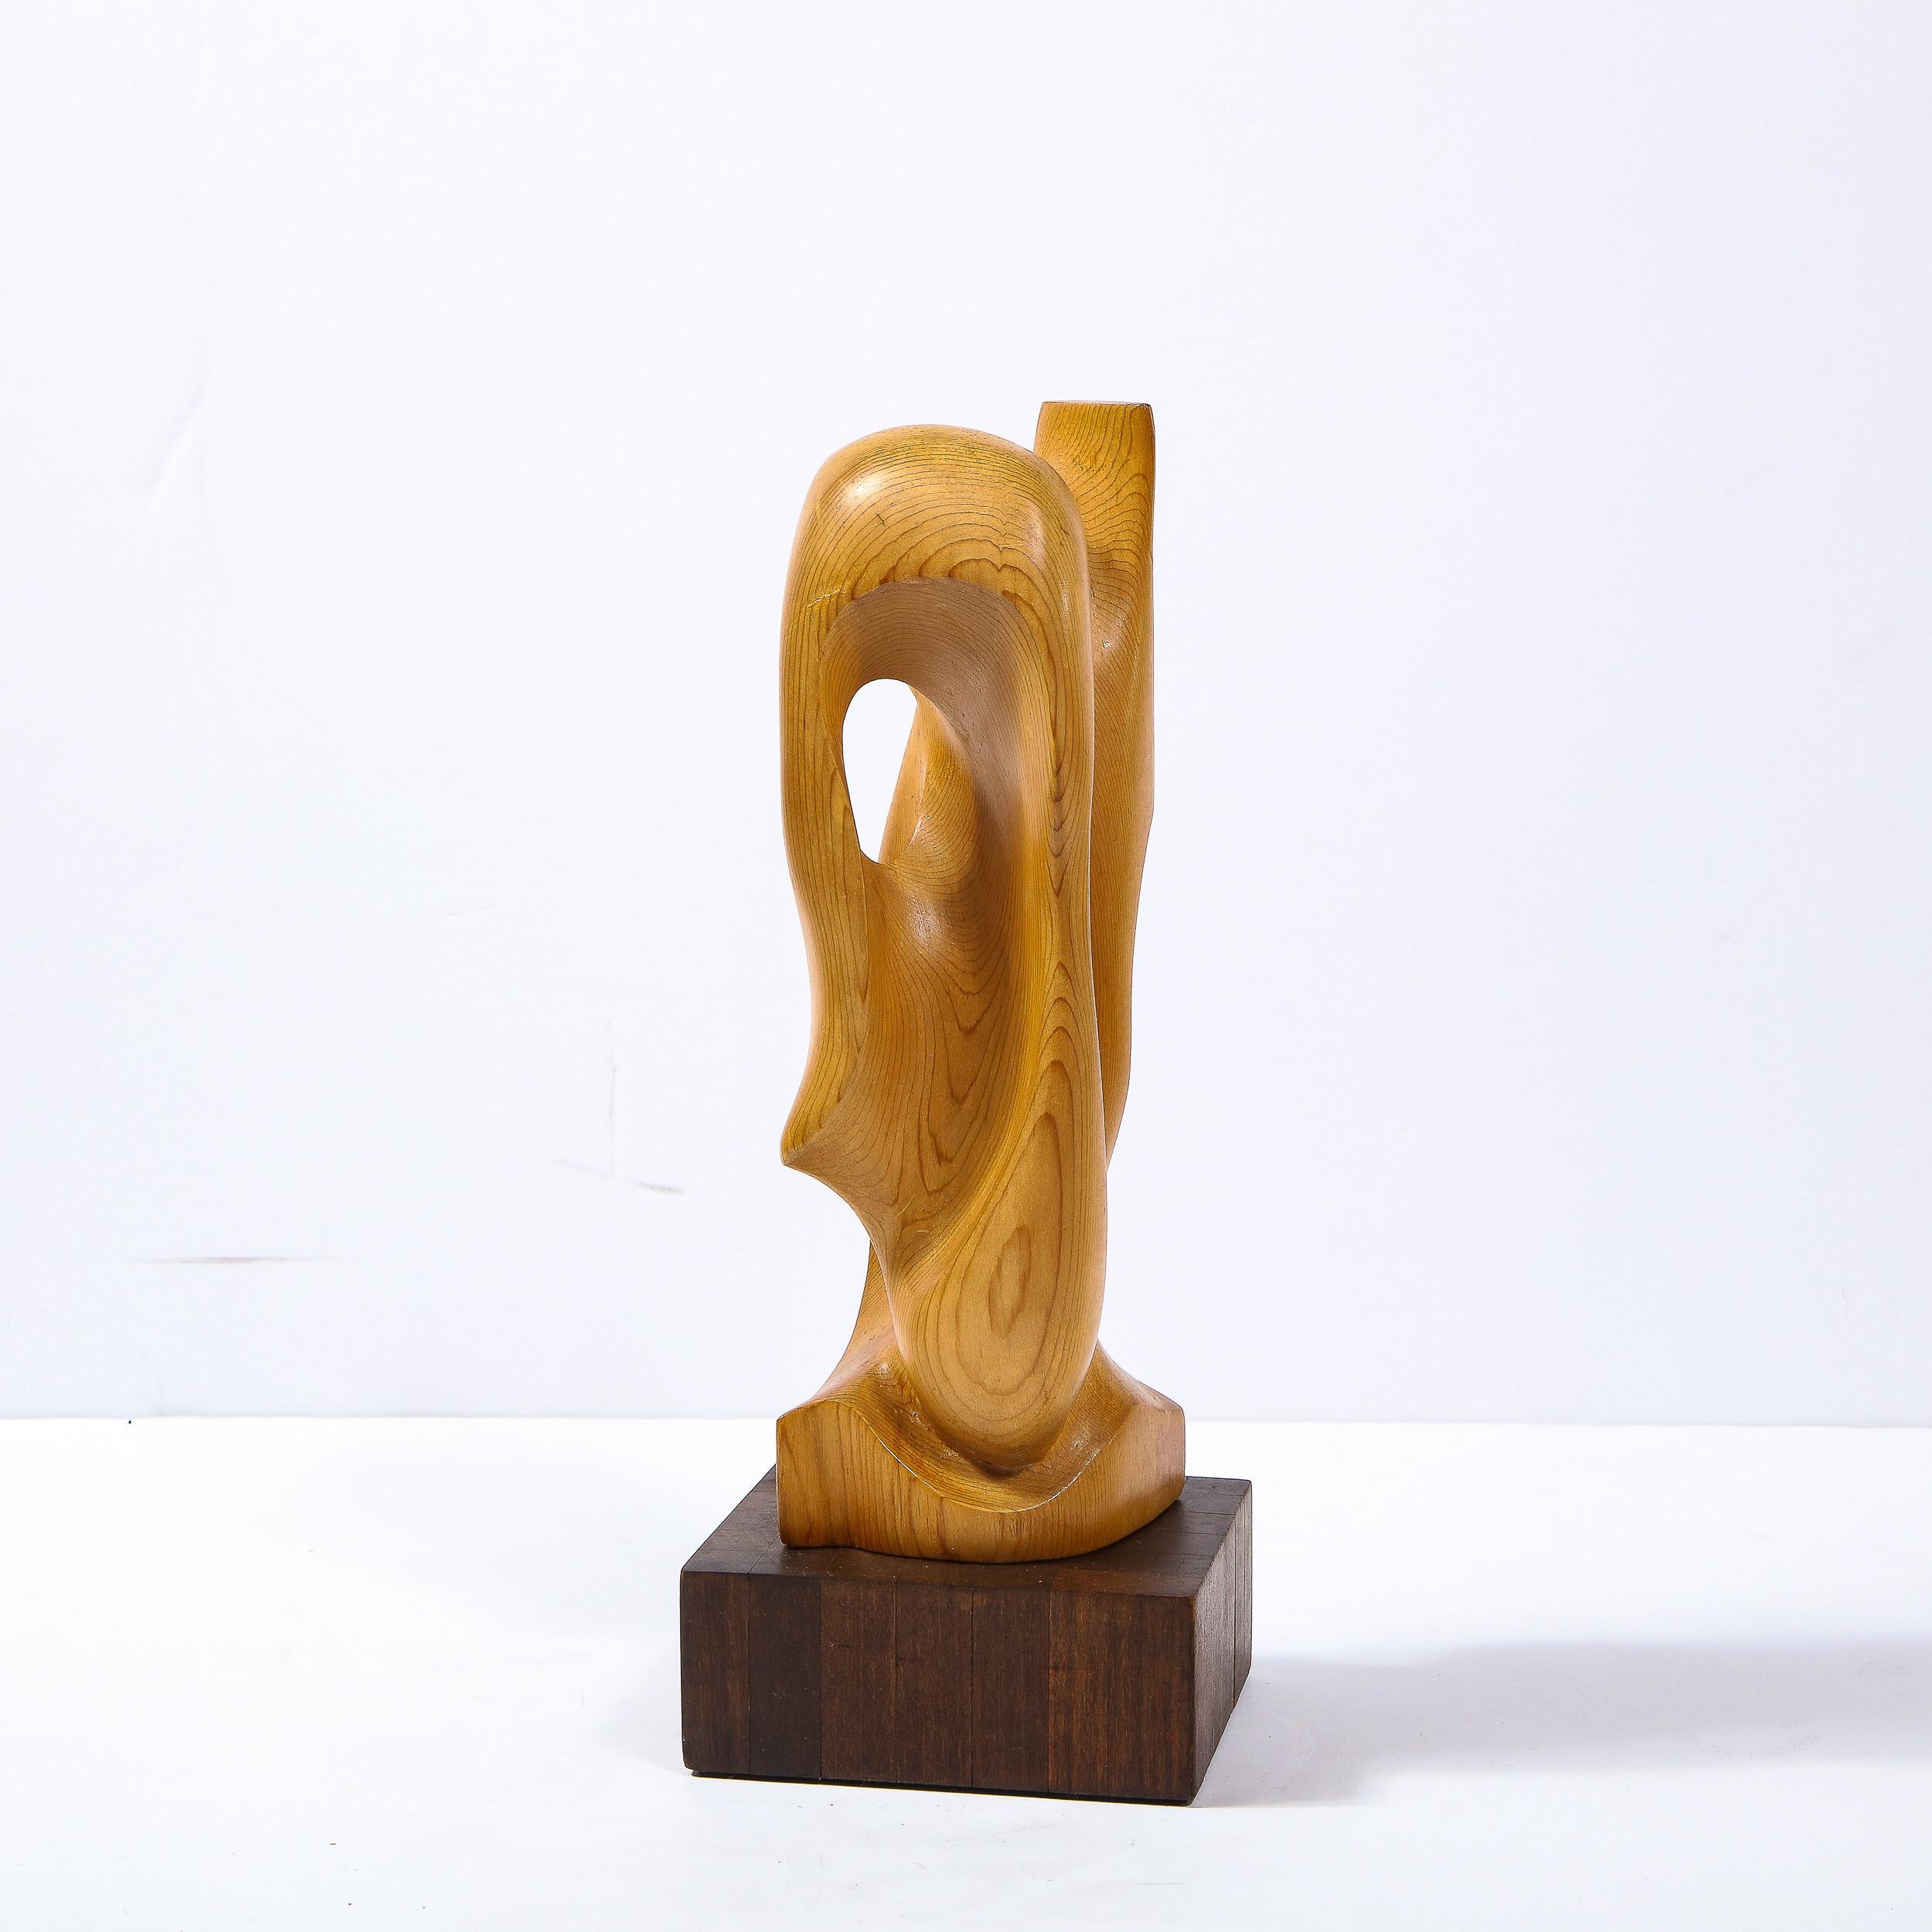 This elegant and sophisticated Mid Century Modern sculpture was realized in the United States circa 1960. It features a curvilinear amorphic abstract body consisting of a panoply of interlacing forms. Composed of hand rubbed oak- showcasing the